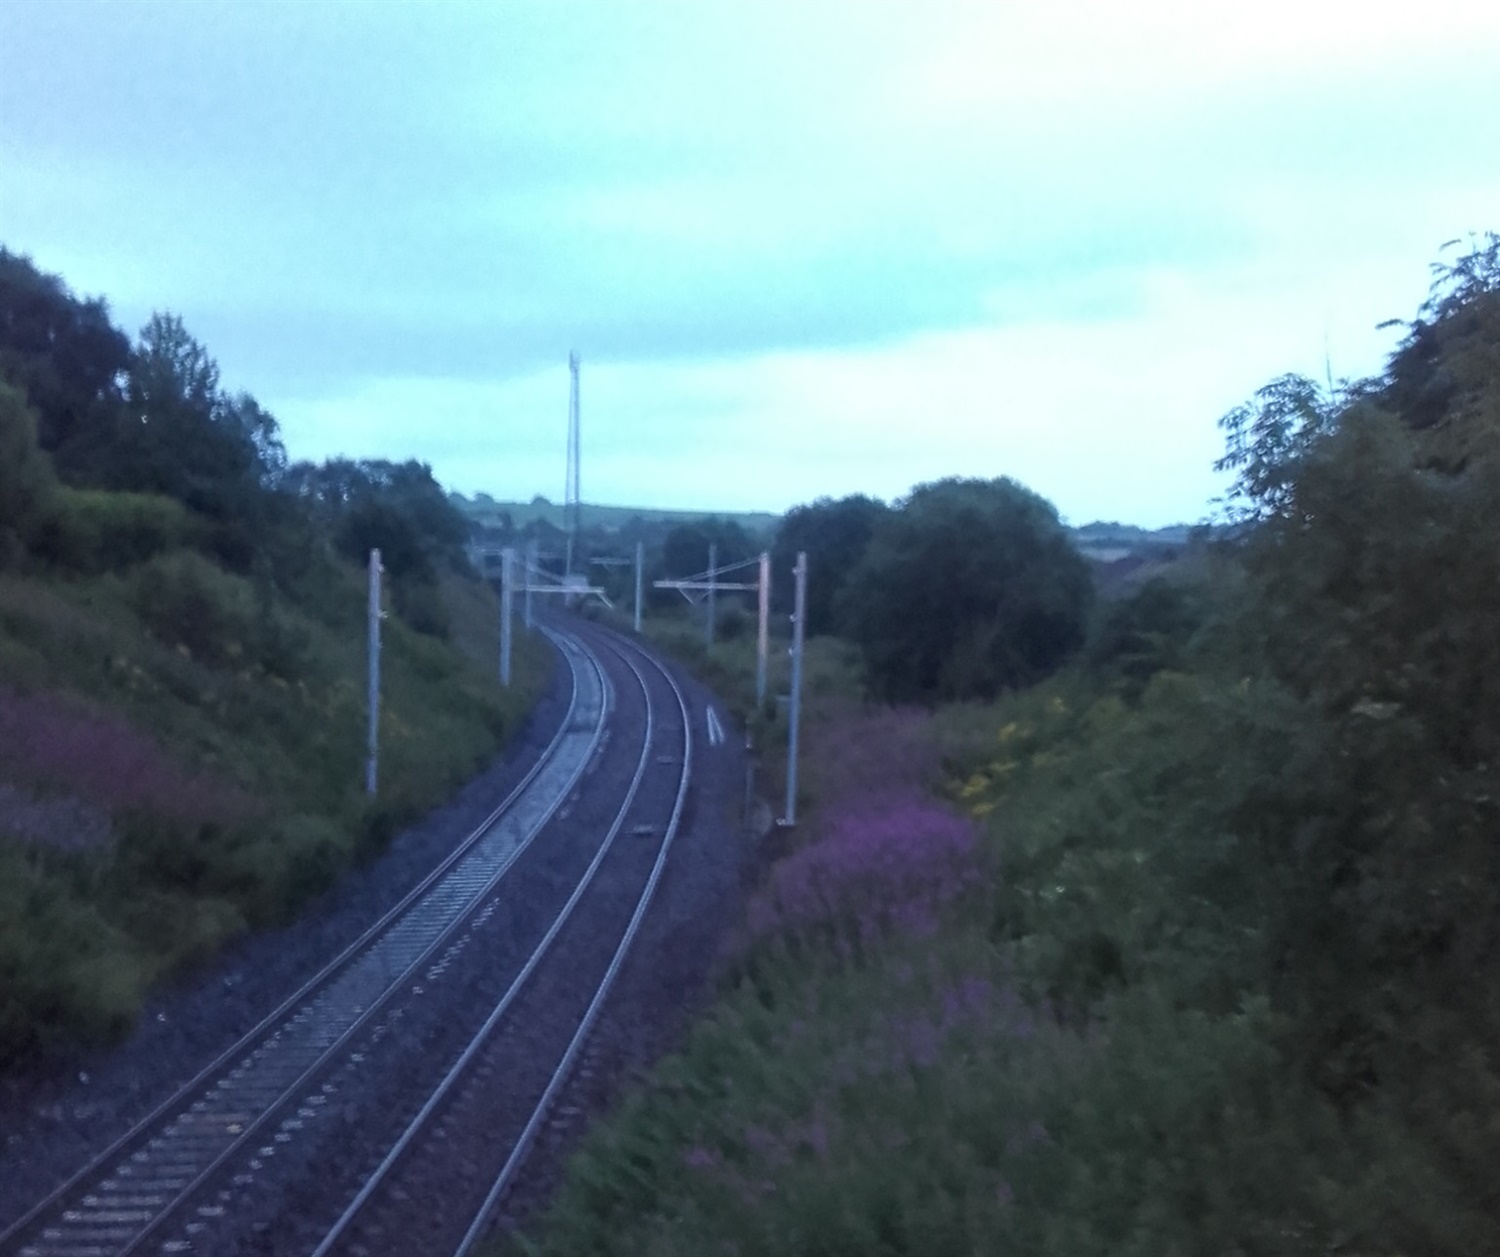 NR erects first mast on Shotts electrification project